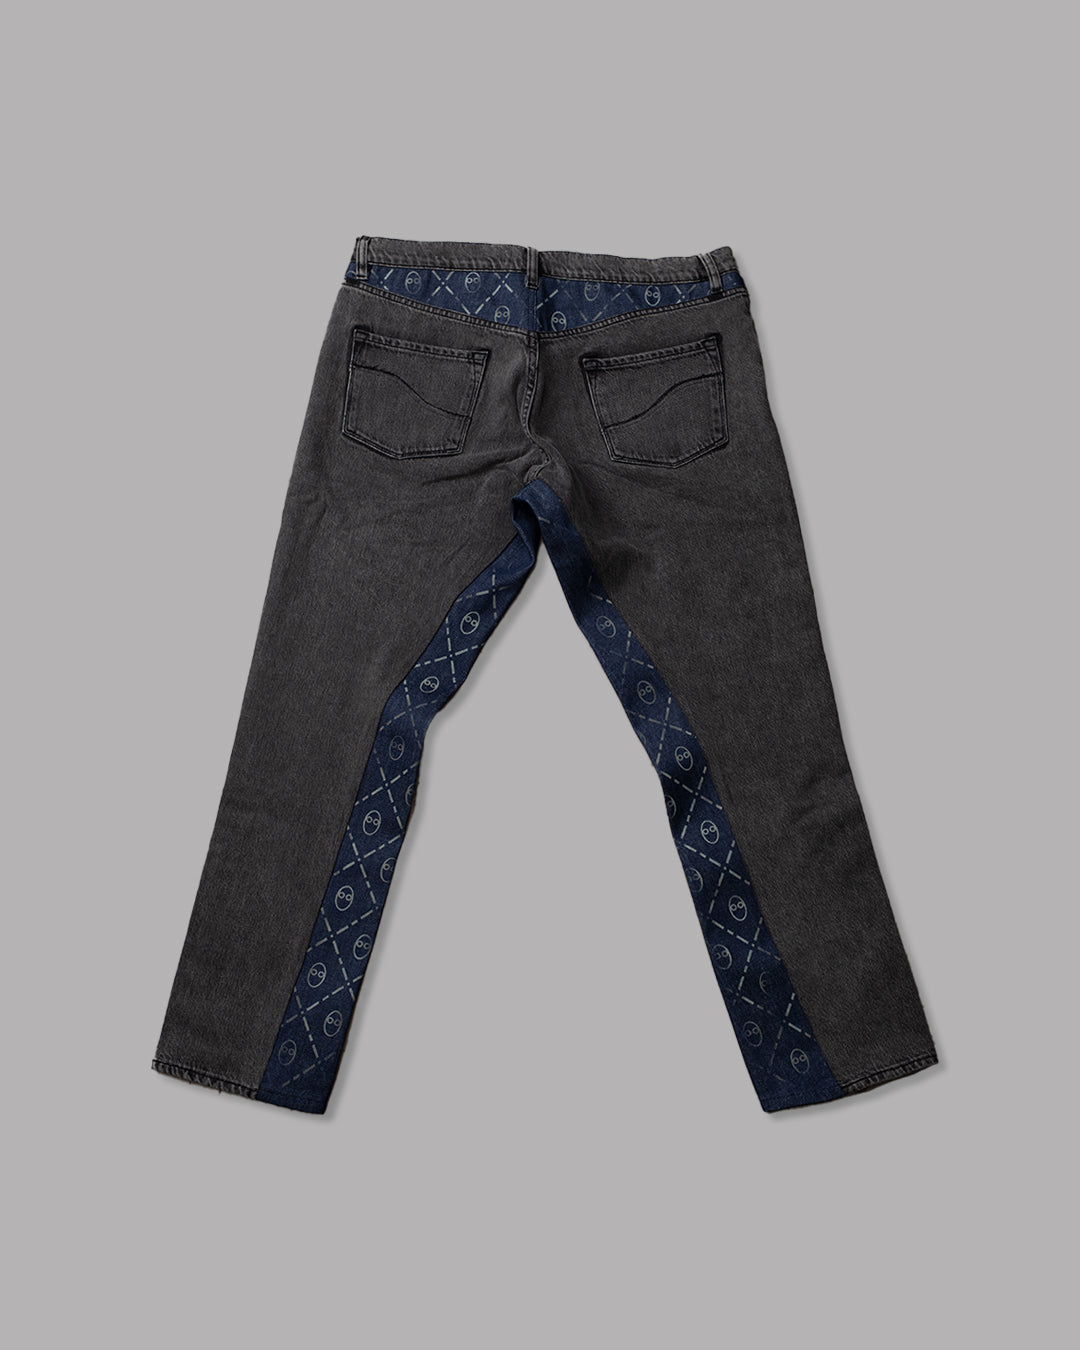 Nocturnal apollo BK + Saturnino jeans - upcycled garment